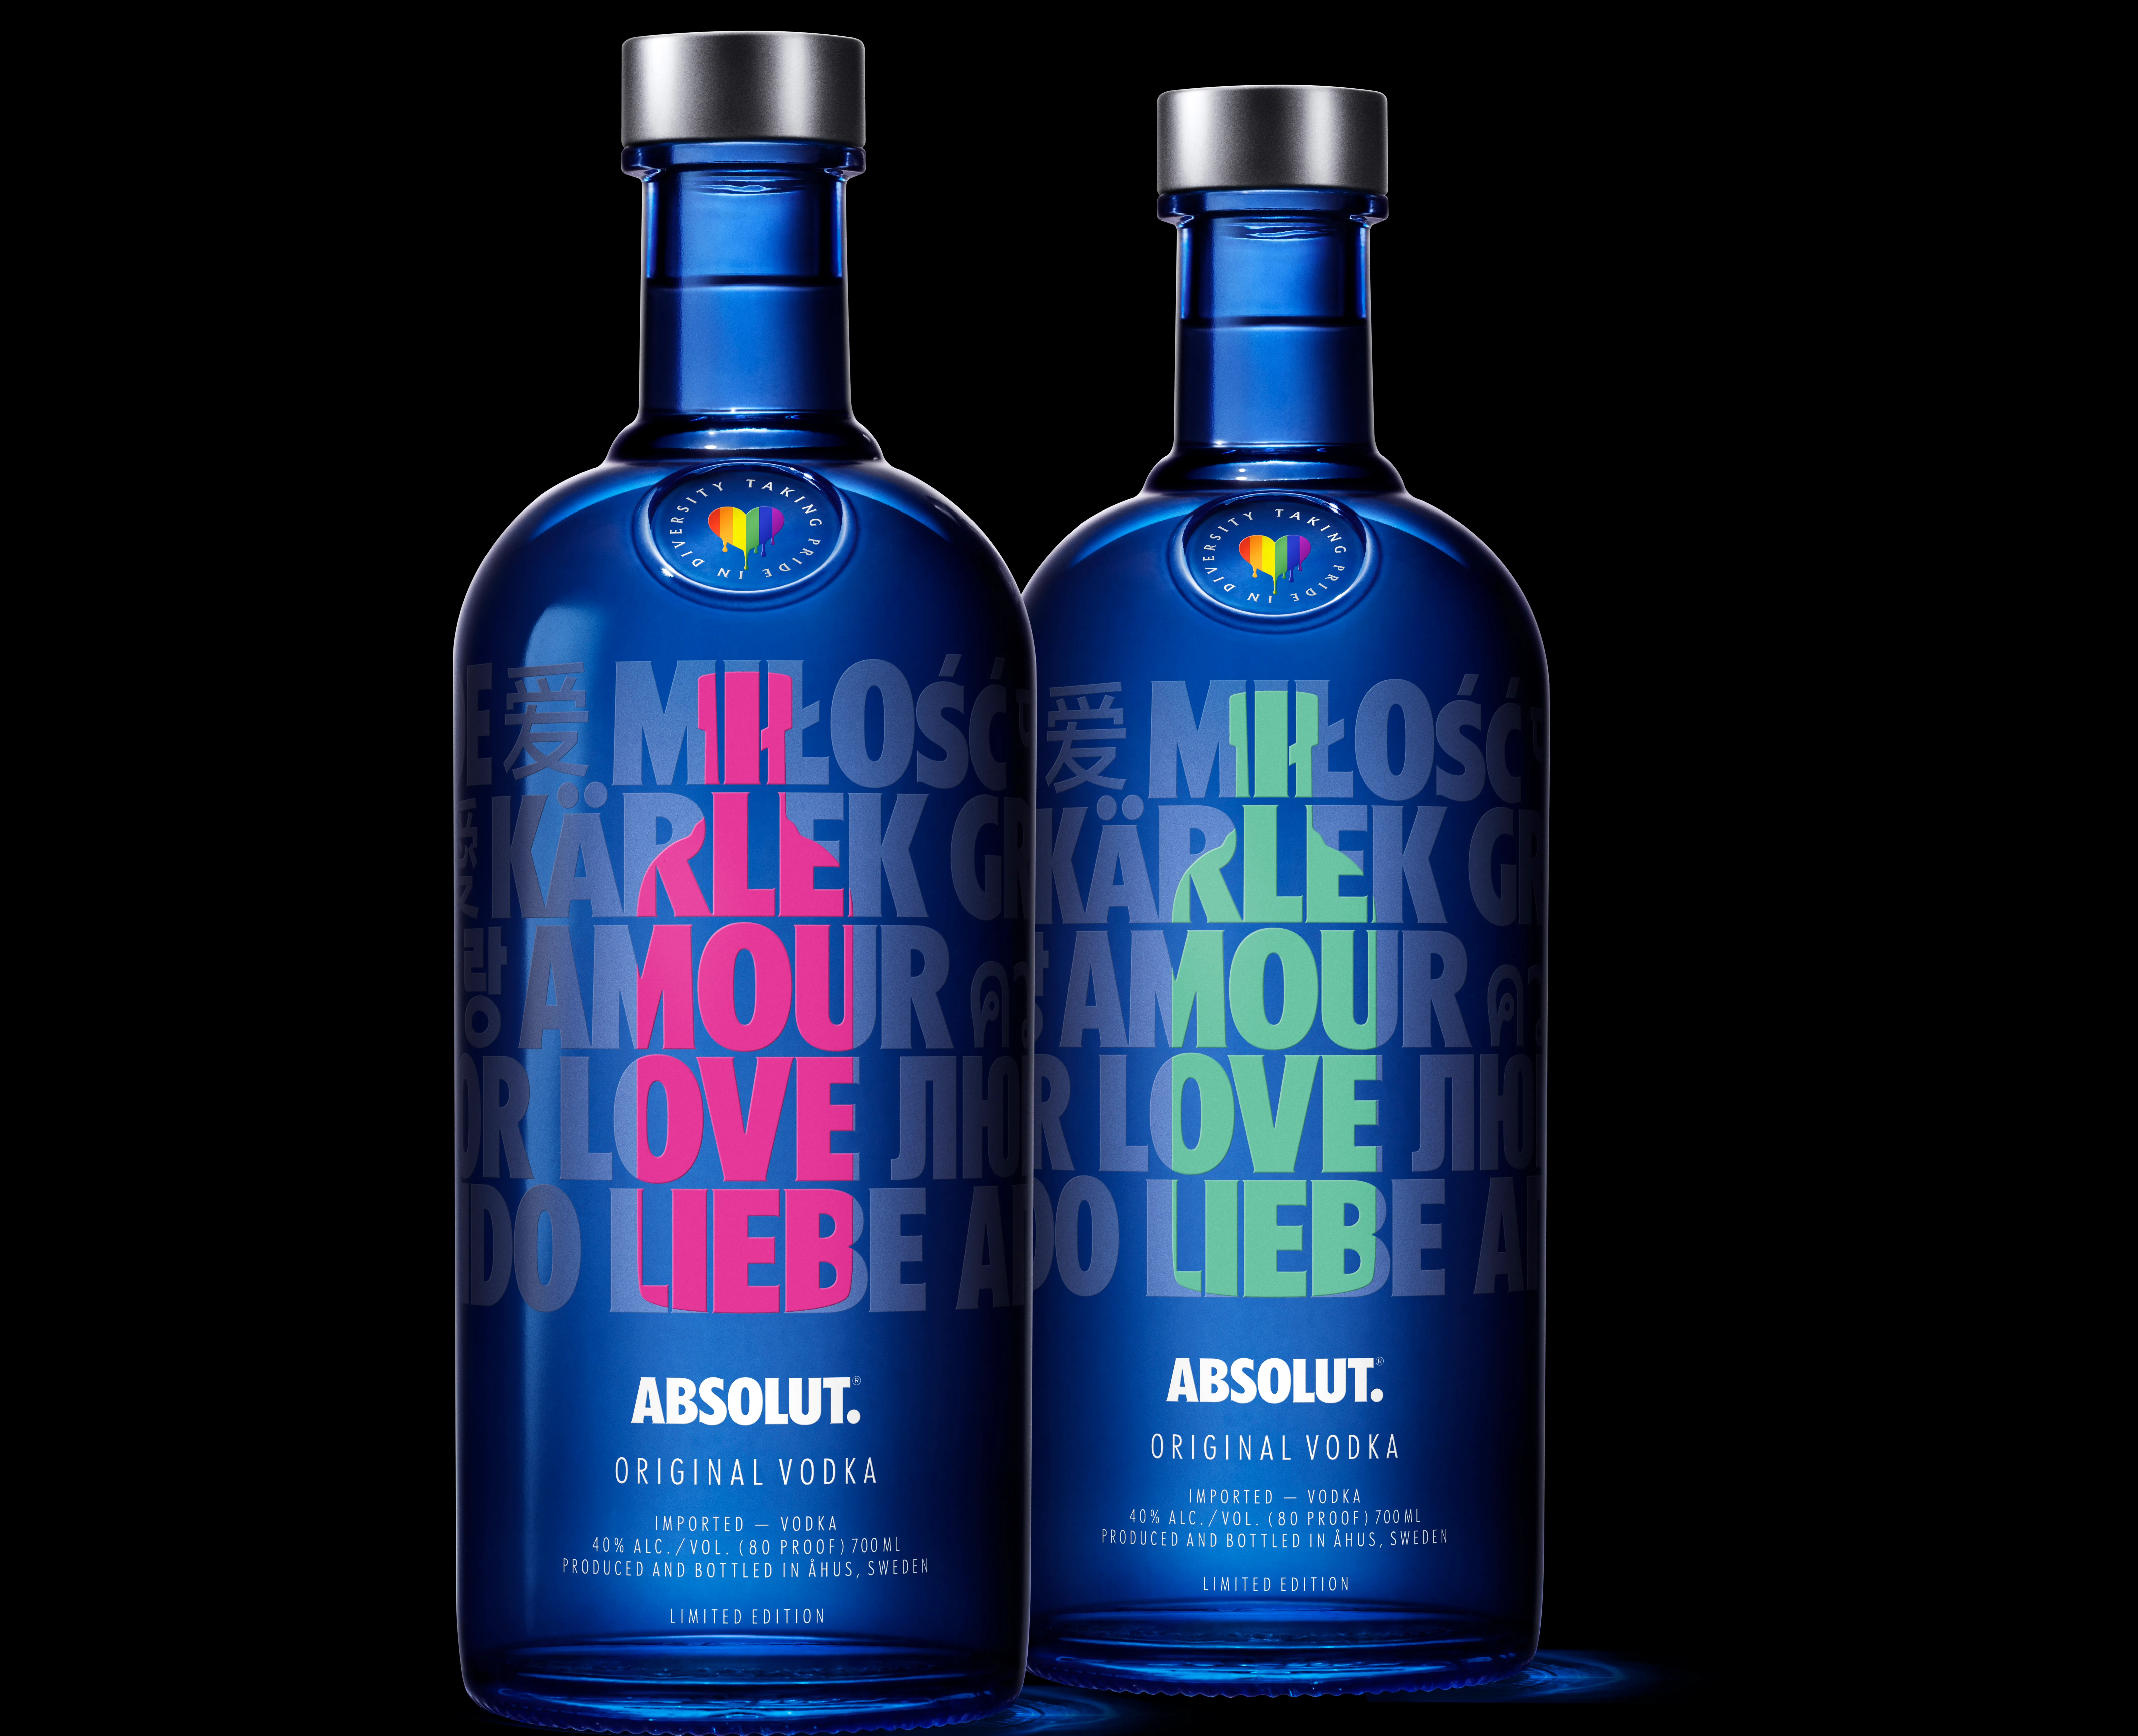 A picture of the Absolut Drop from Absolut, which is launching a campaign on how to be a better LGBT ally.